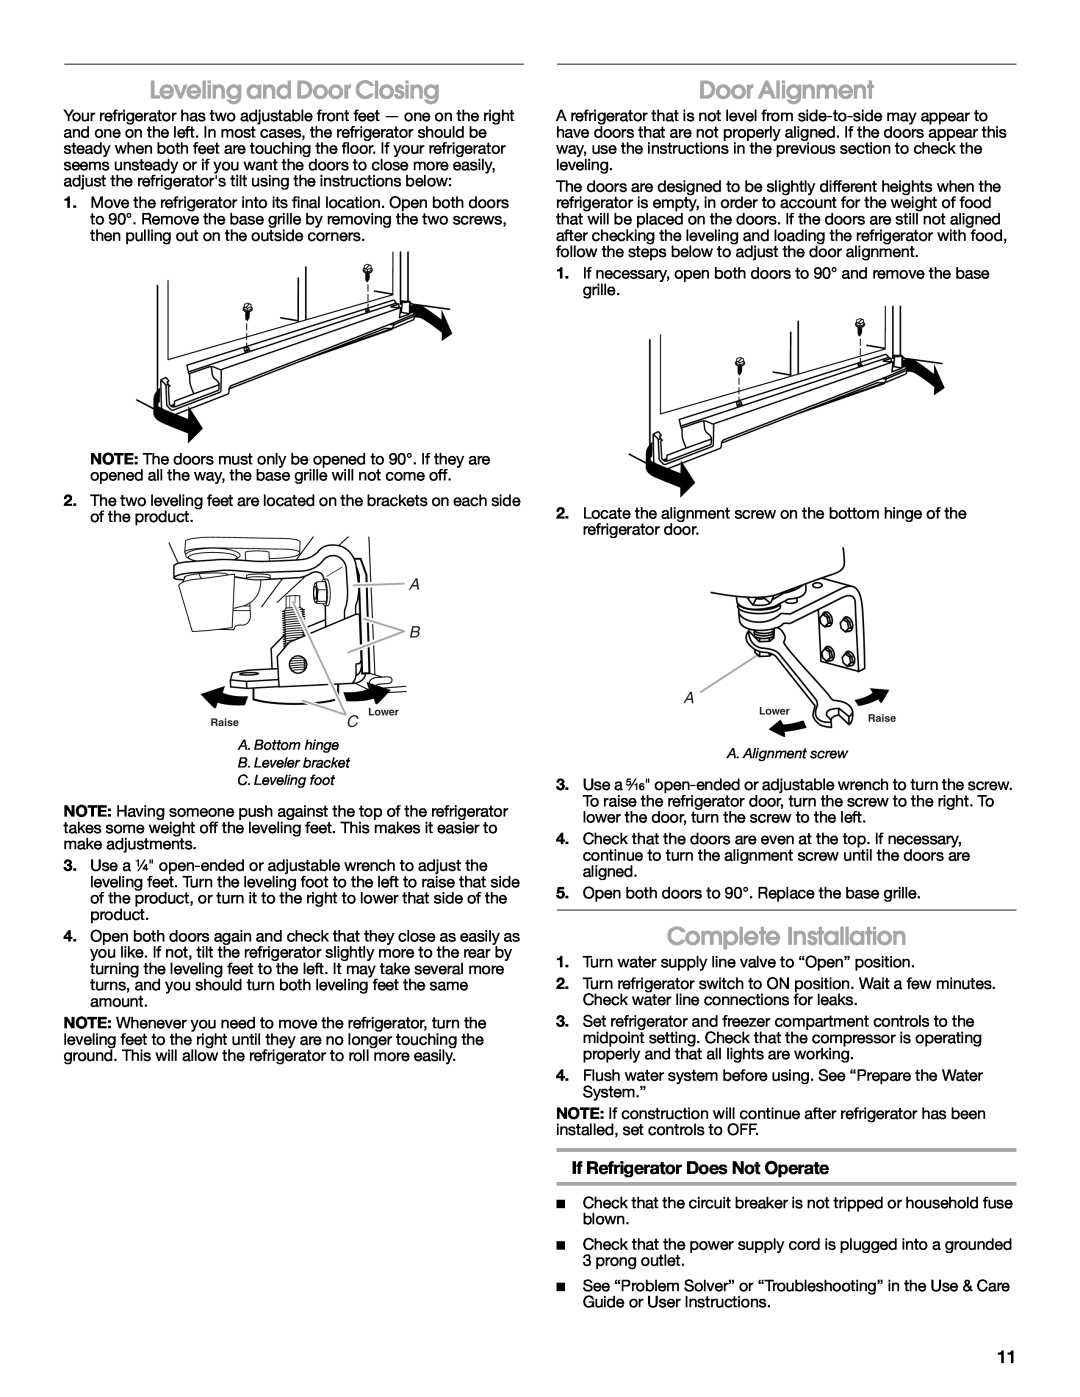 Whirlpool W10168334B Leveling and Door Closing, Door Alignment, Complete Installation, If Refrigerator Does Not Operate 